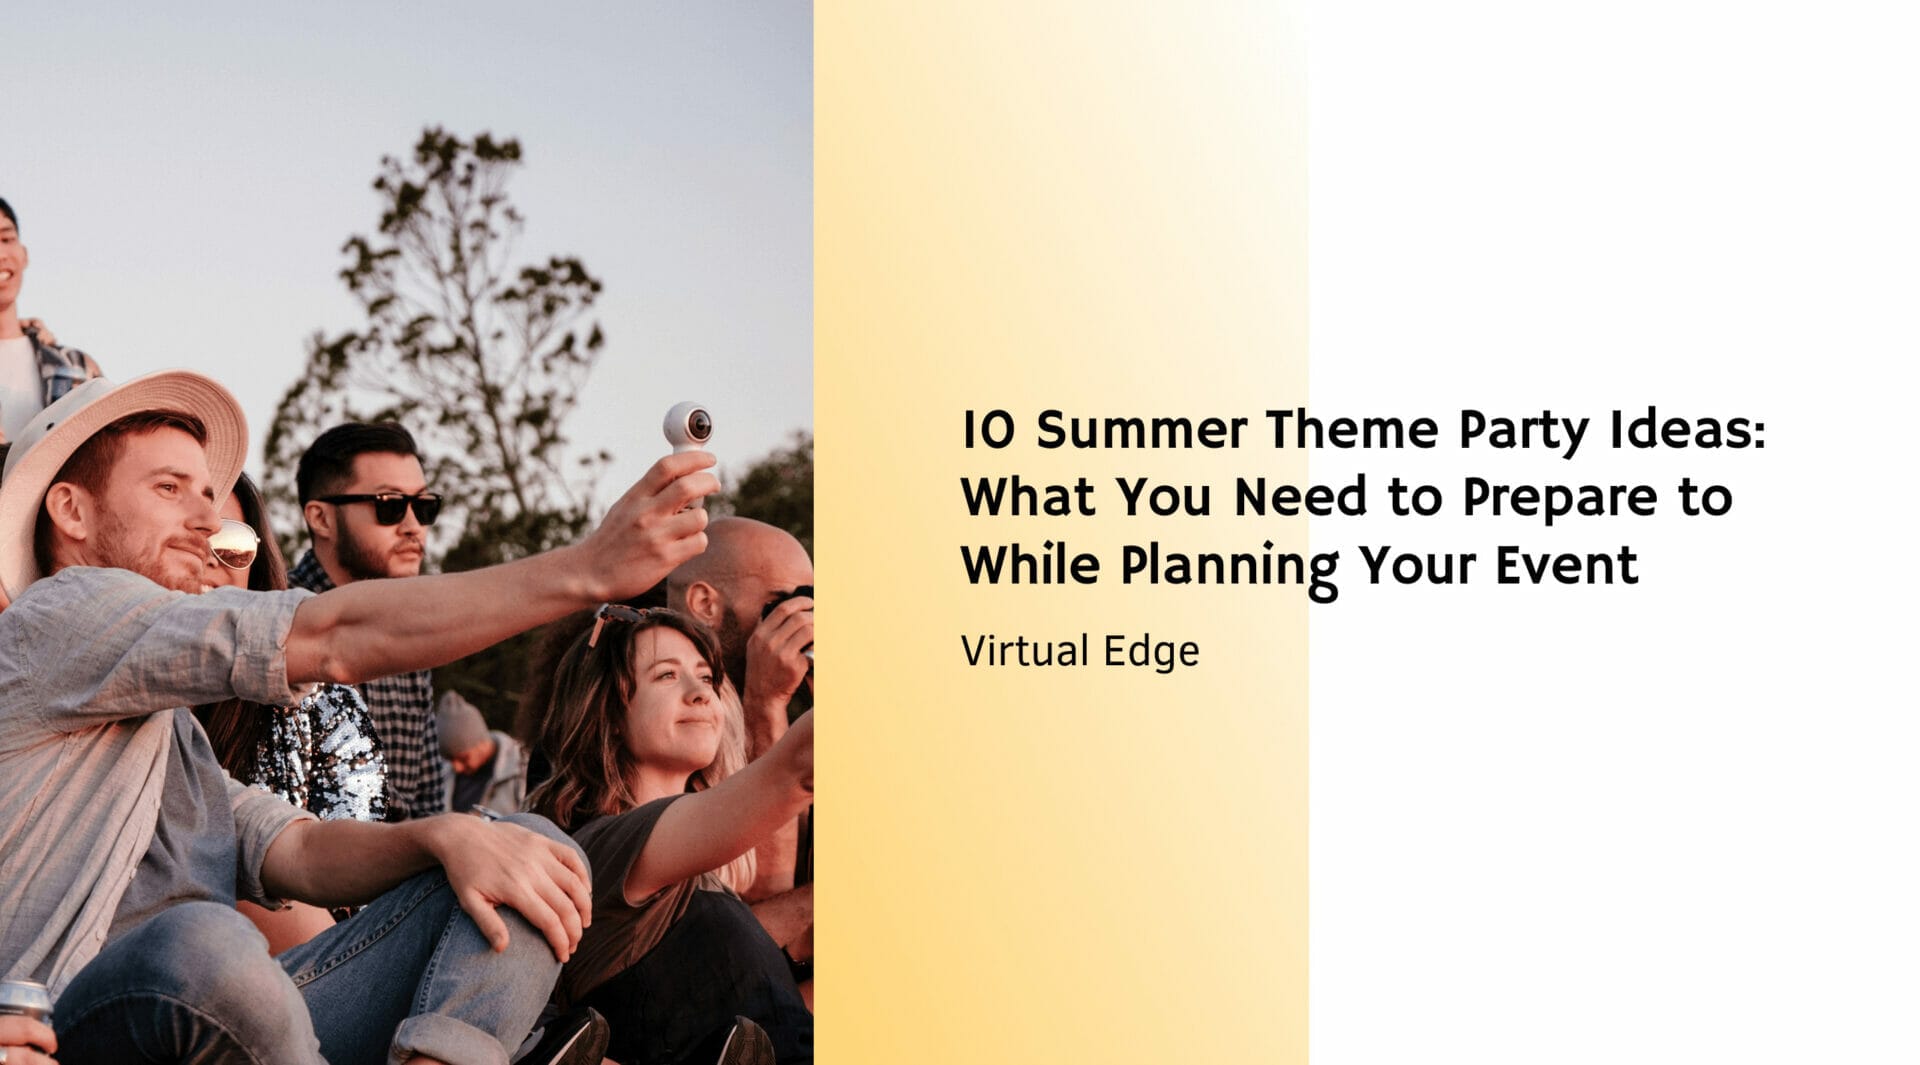 10 Summer Theme Party Ideas: What You Need to Prepare to While Planning Your Event